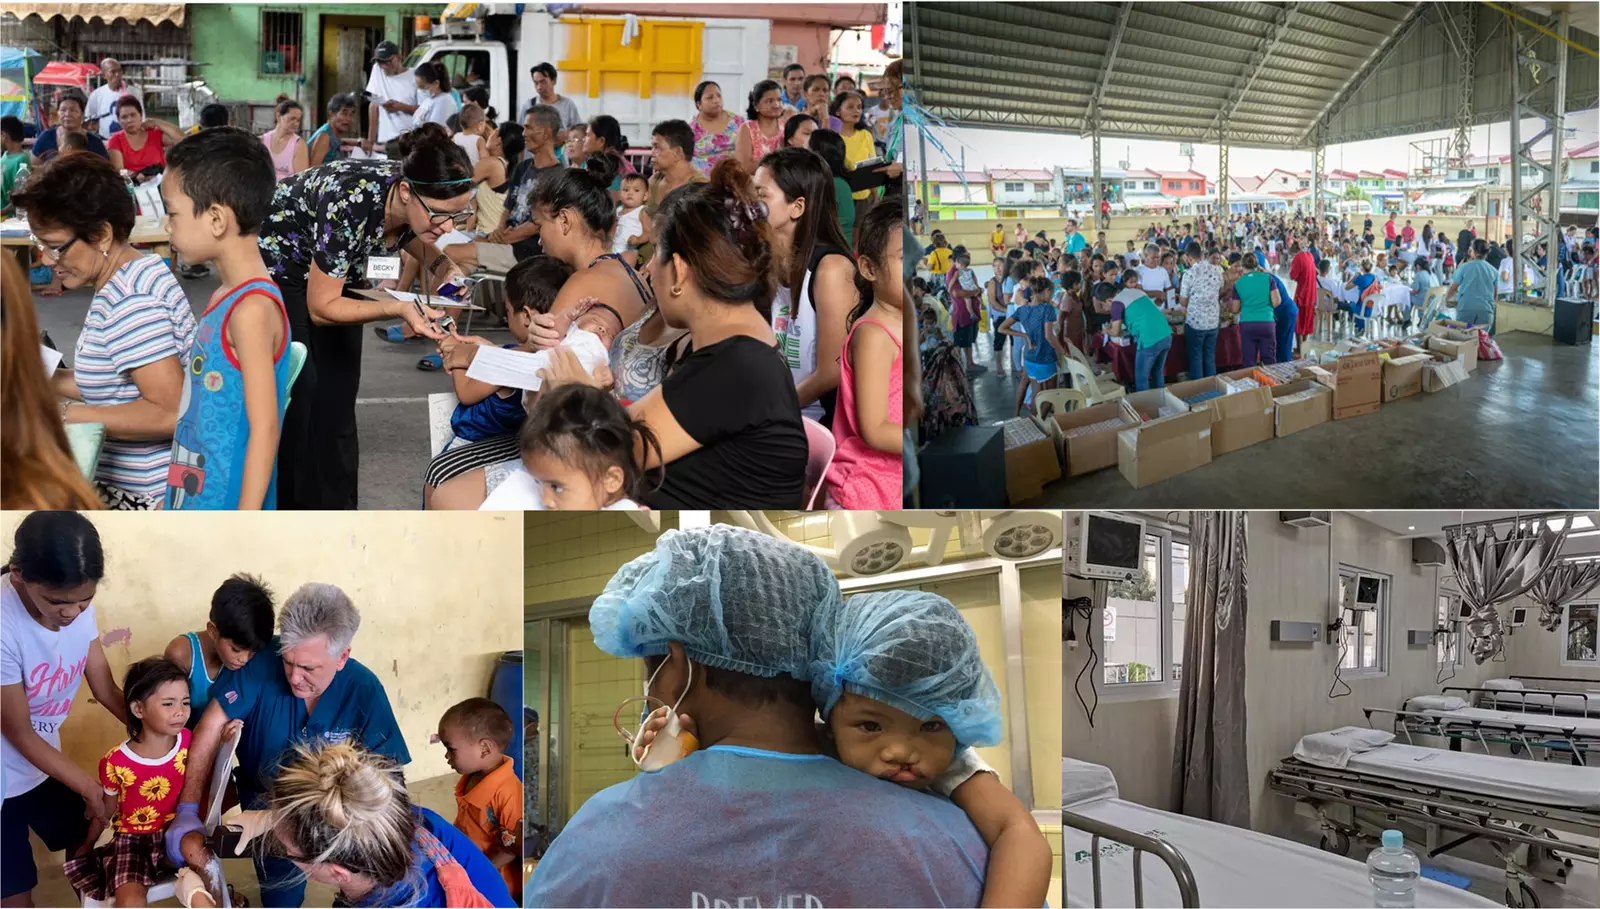 AdventHealth team members delivering healthcare services and supplies to local residents in the Philippines